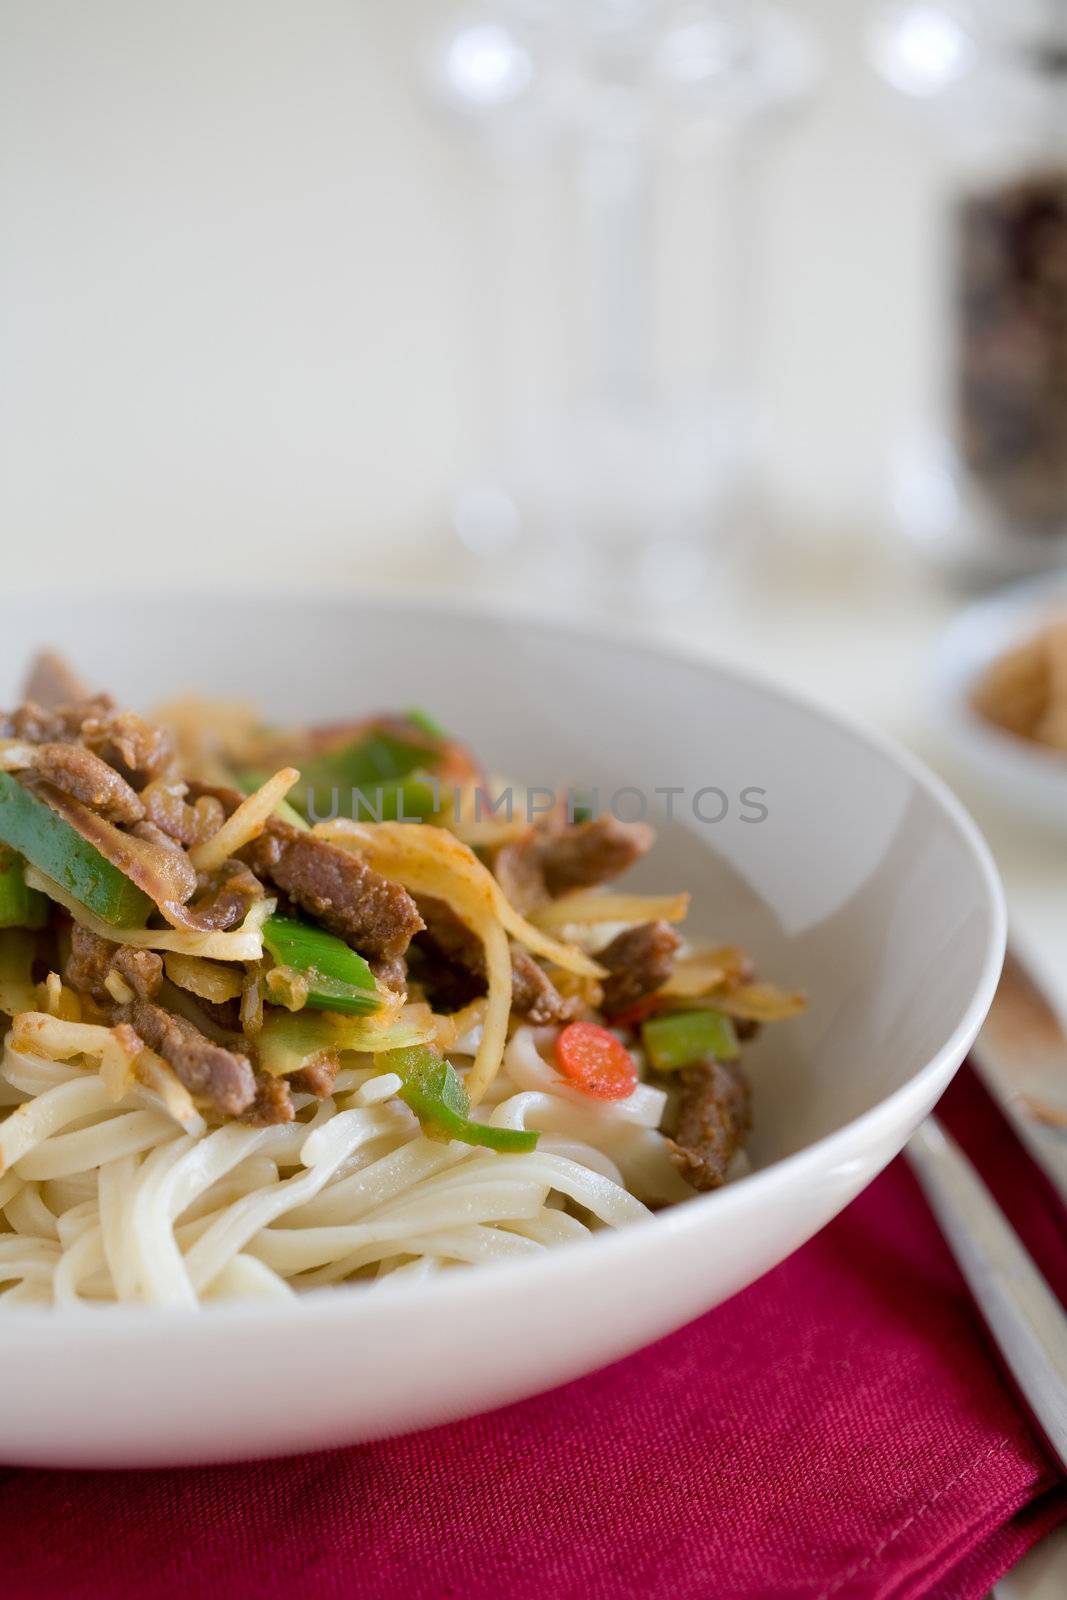 Deliciously prepared noodle dish with beef and vegetables